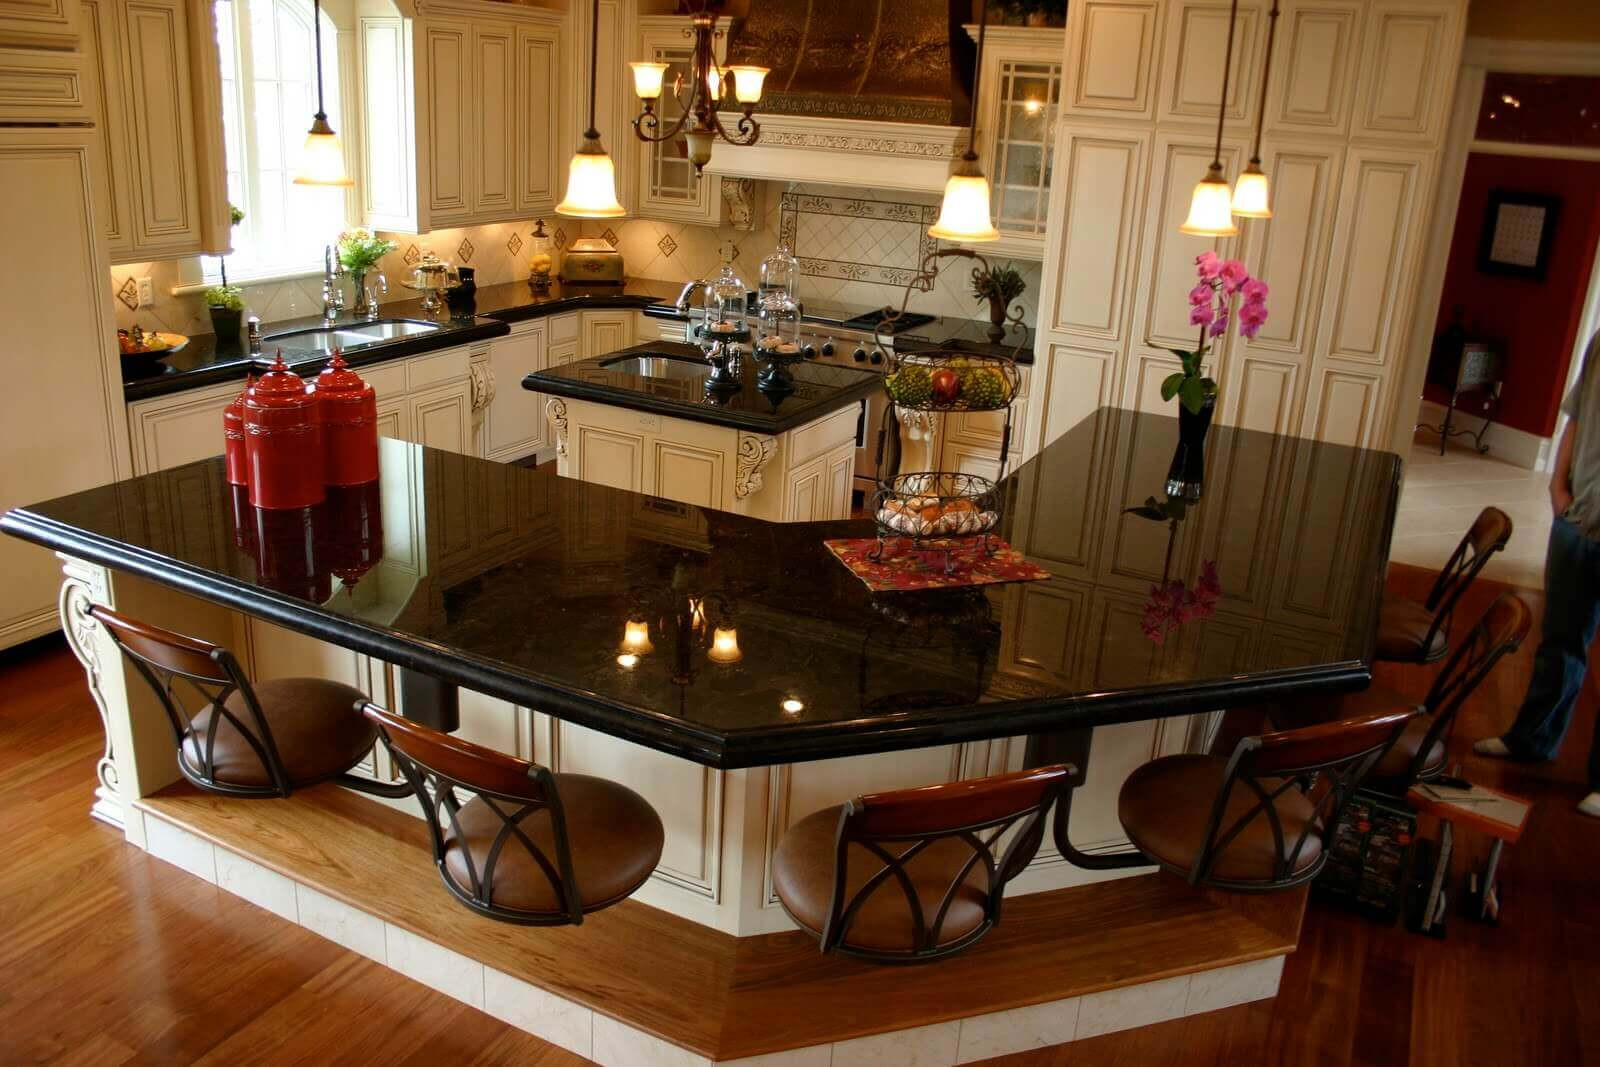 Kitchen Island With Granite Countertop
 68 Deluxe Custom Kitchen Island Ideas Jaw Dropping Designs